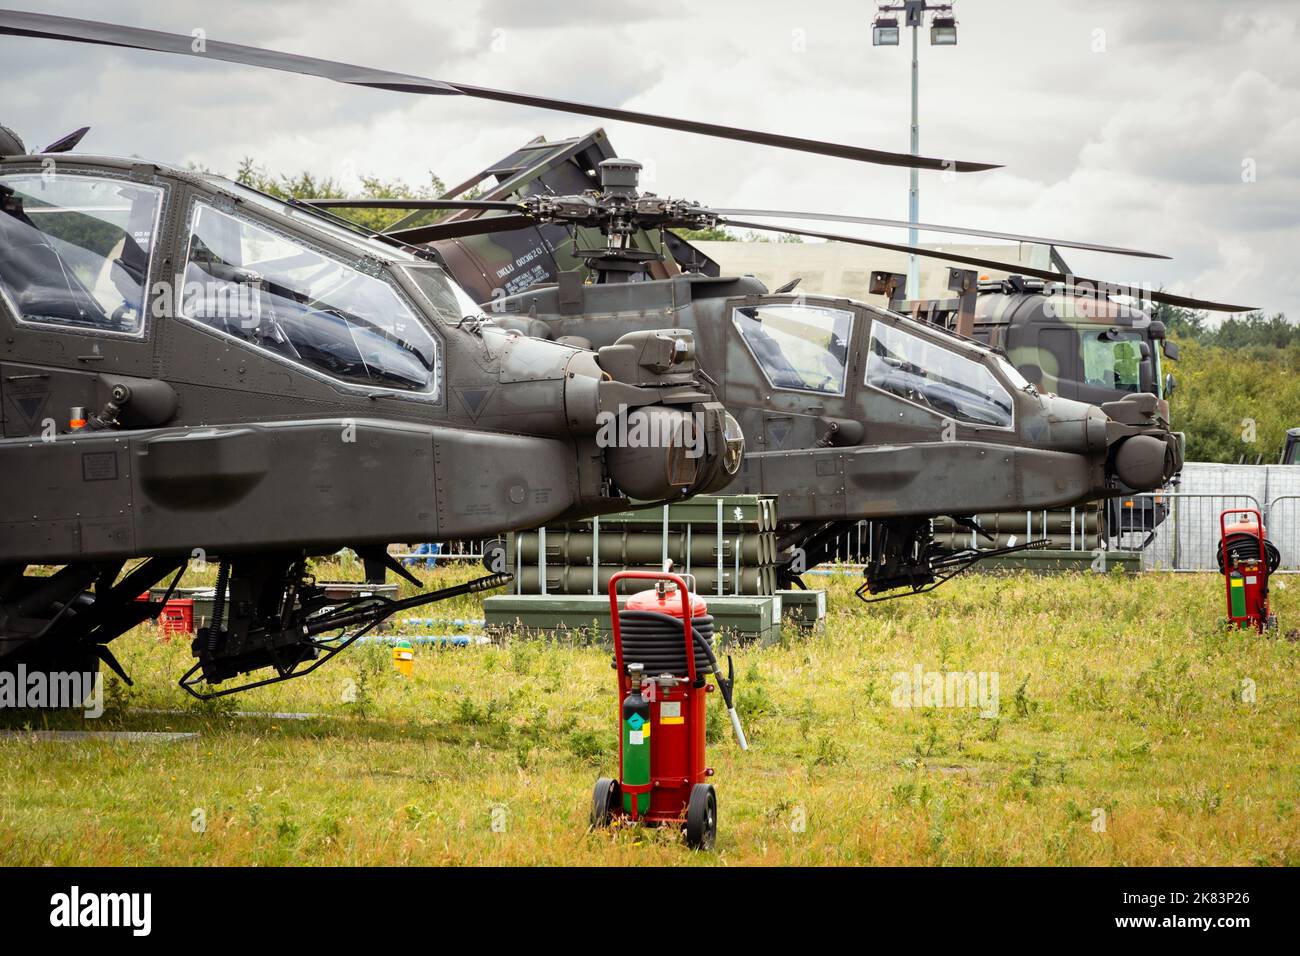 Boeing AH-64 Appache attack helicopters at Gilze-Rijen Air Base, The Netherlands - June 20, 2014 Stock Photo